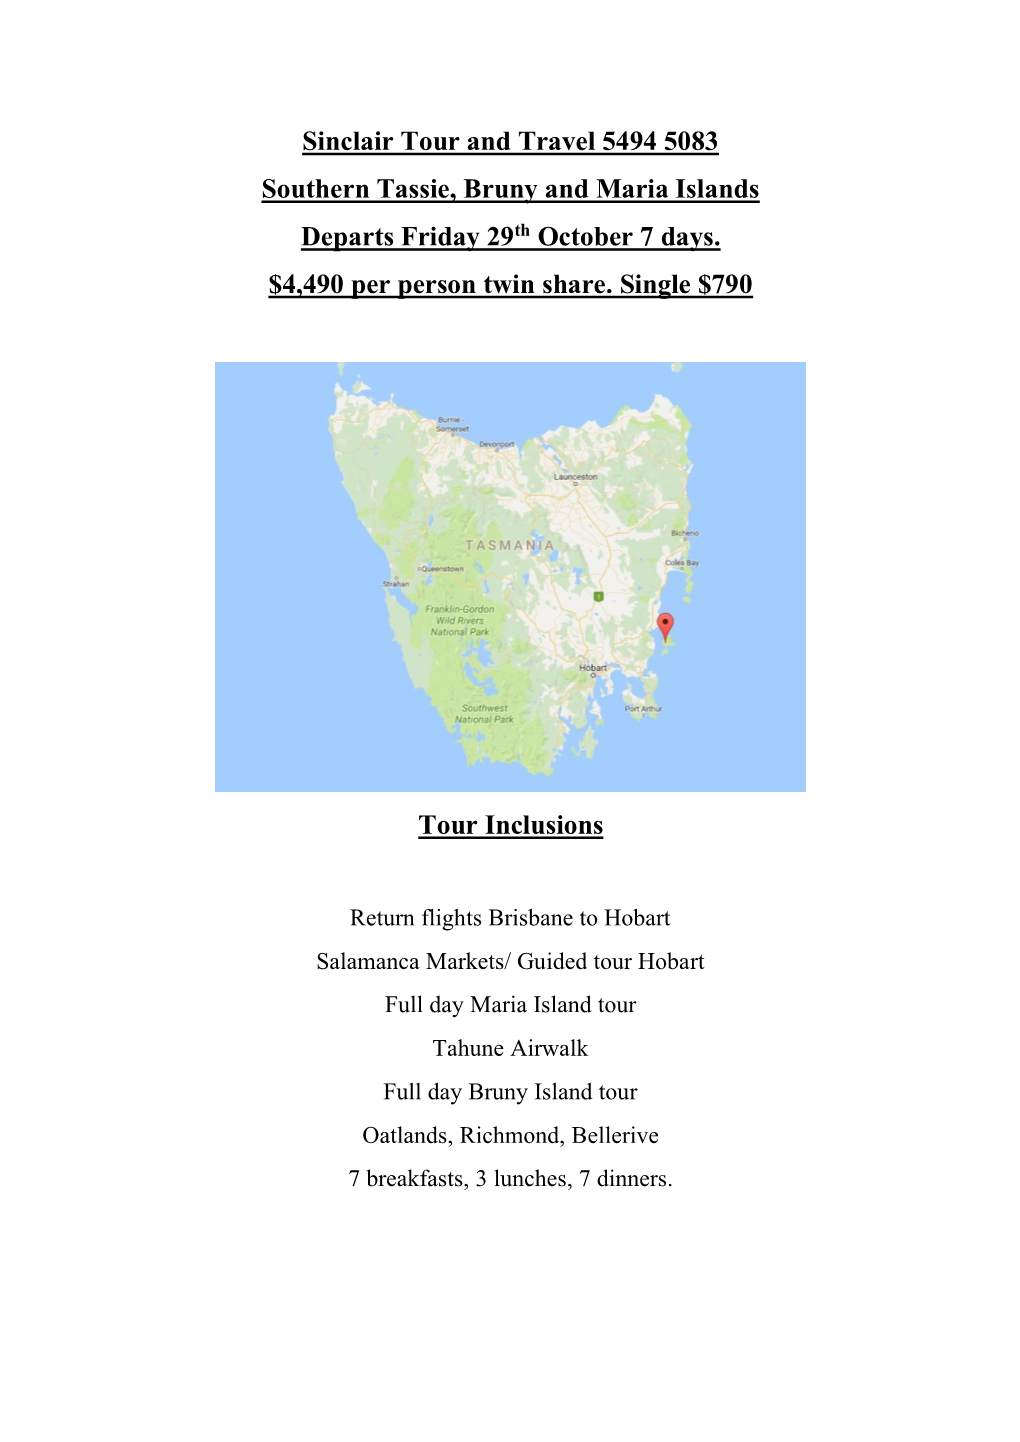 Sinclair Tour and Travel 5494 5083 Southern Tassie, Bruny and Maria Islands Departs Friday 29Th October 7 Days